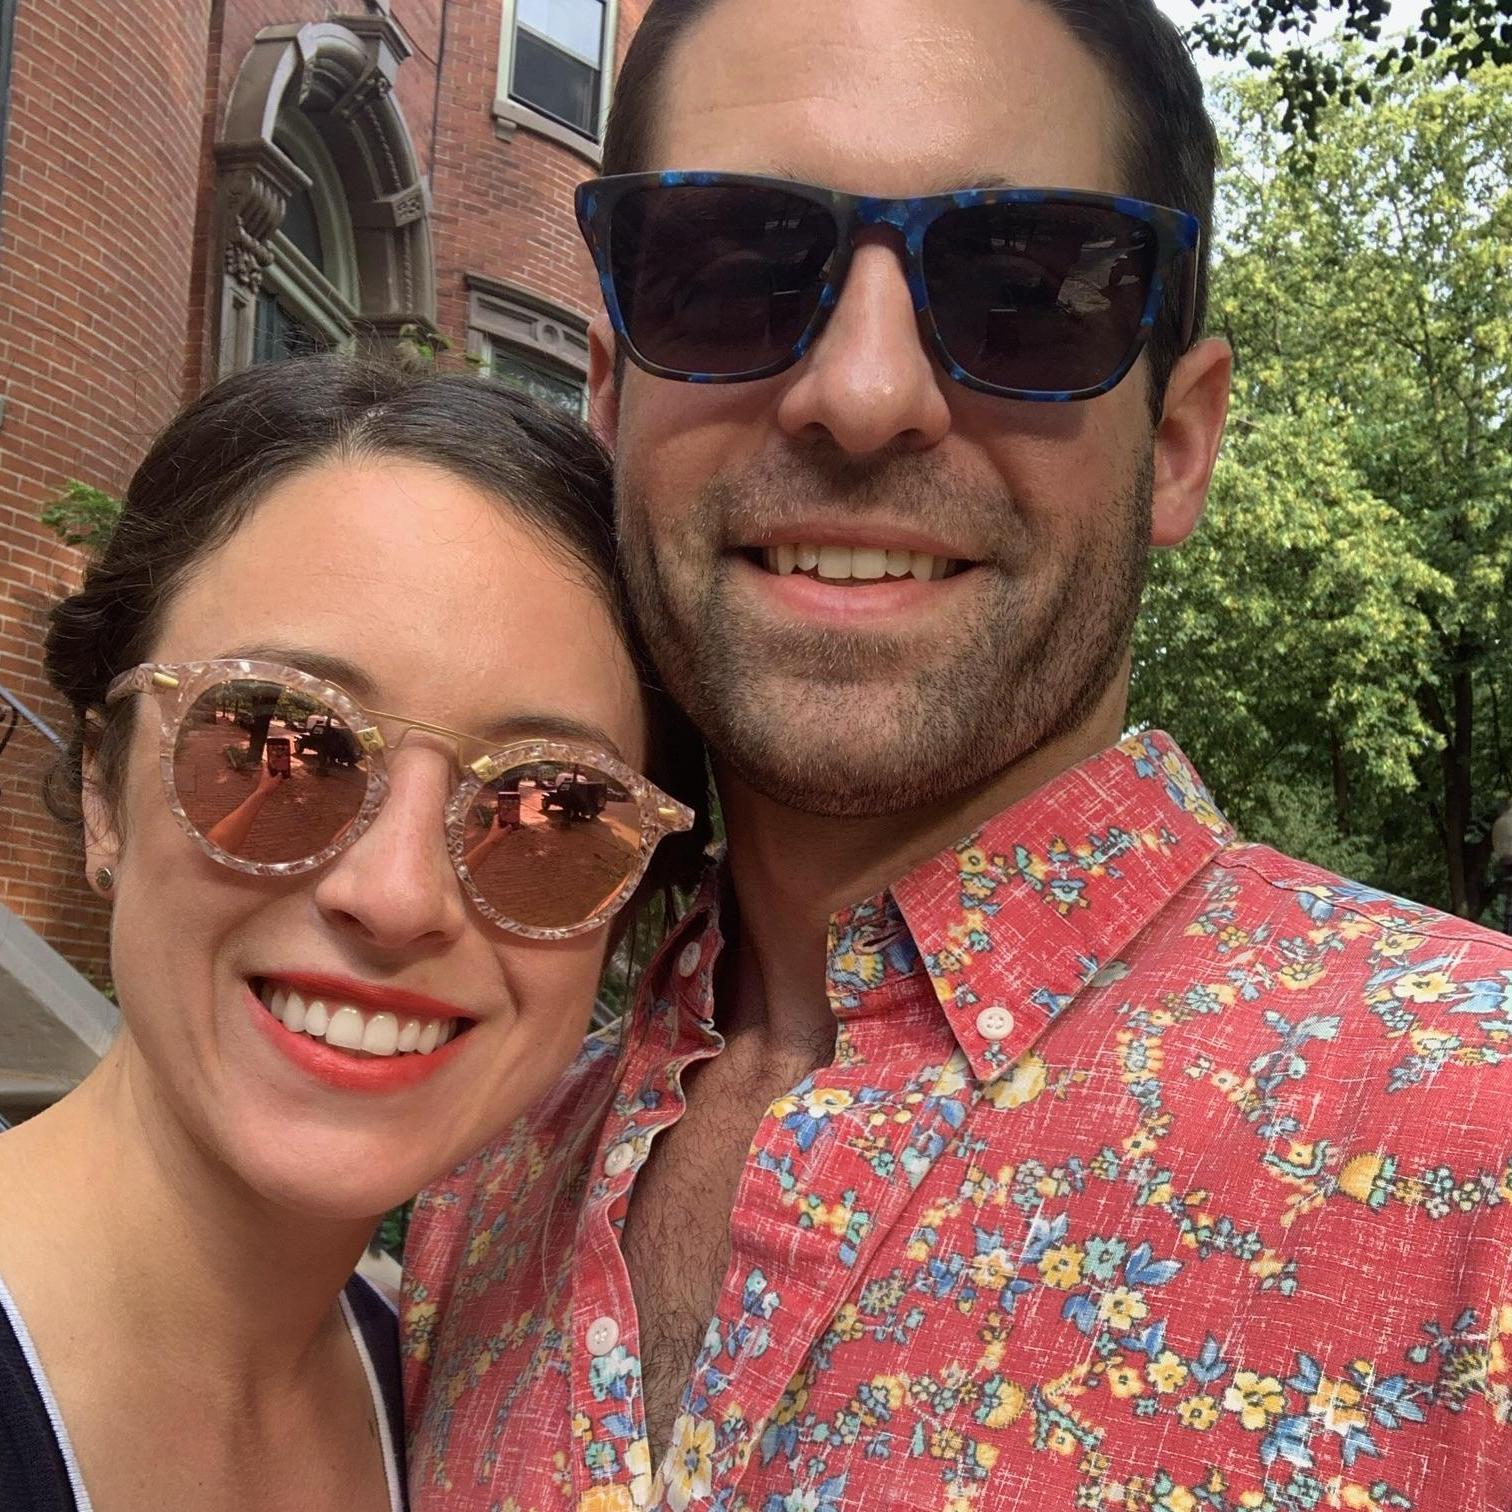 Us bummin around Meg'sold neighborhood in Boston, the South End, on the fourth of July 2019.